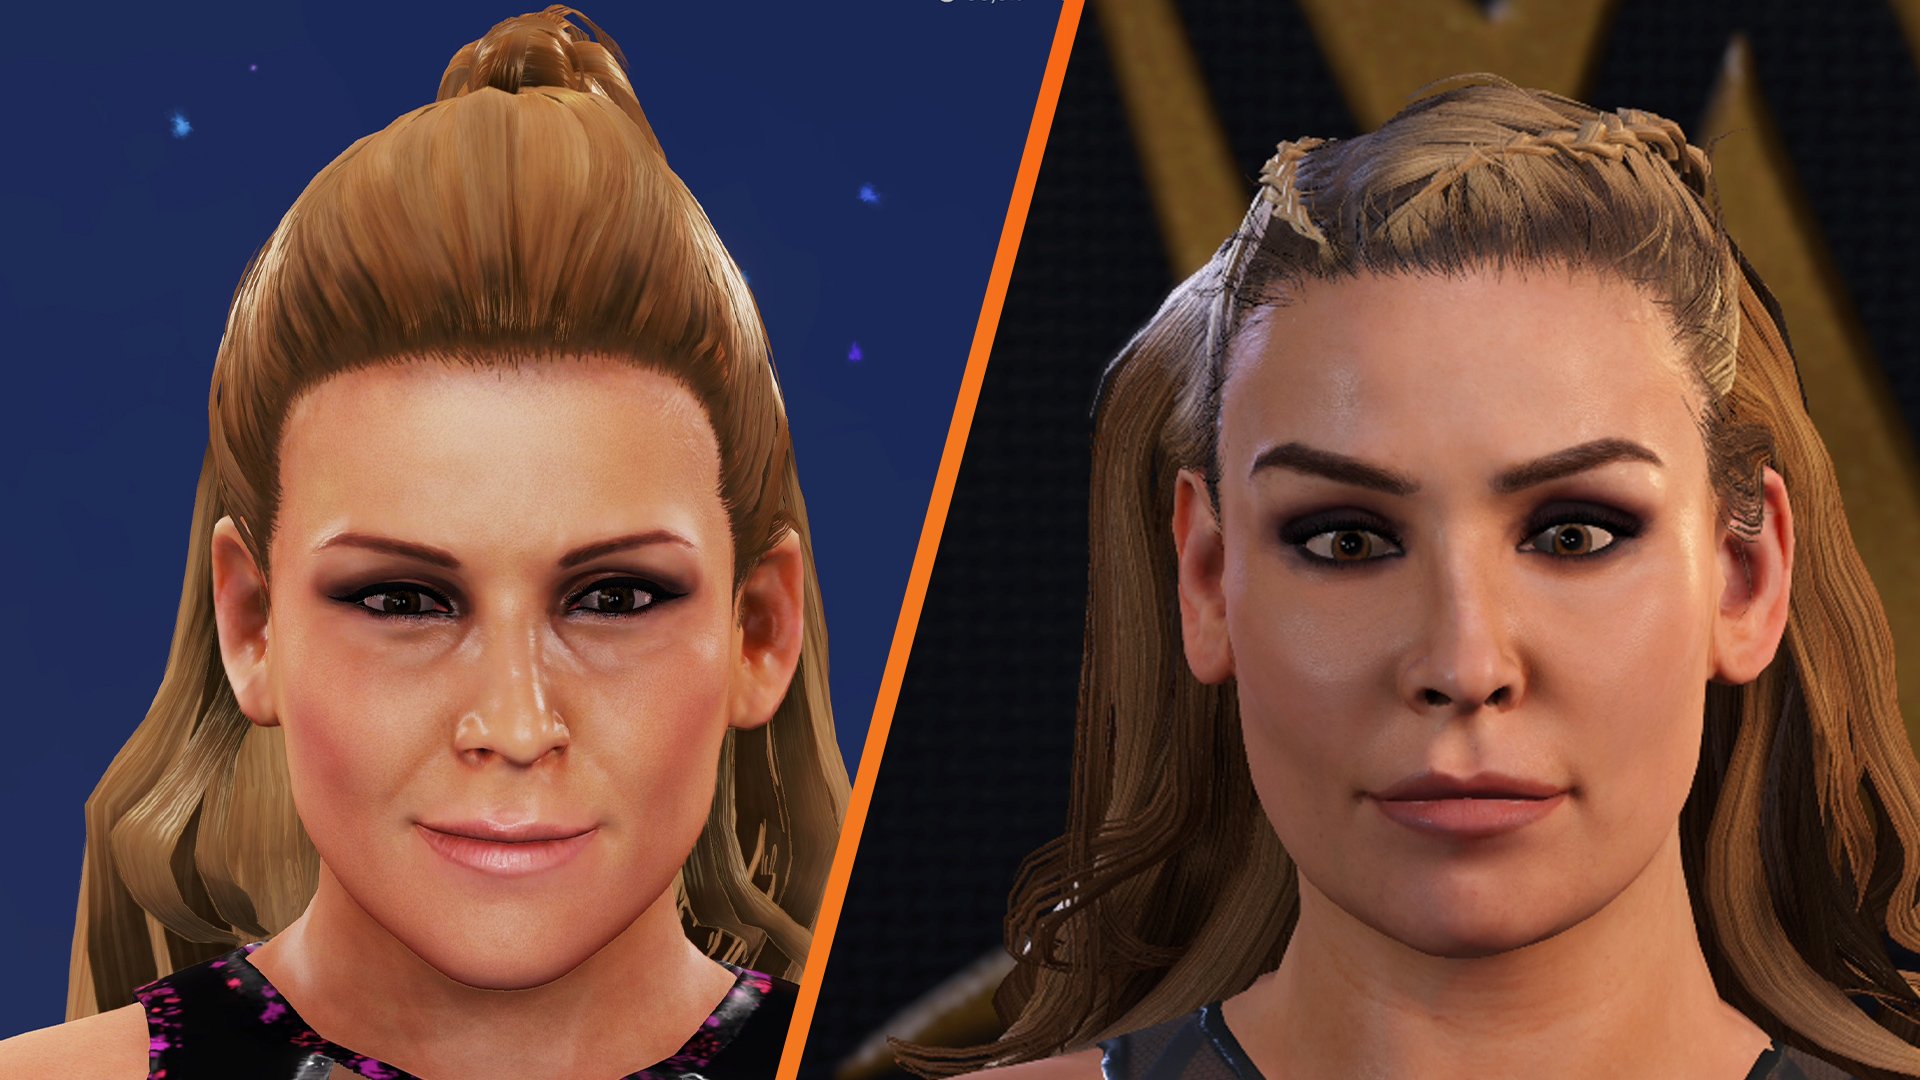 Petition · MORE WOMEN HAIR OPTIONS IN WWE 2K22 ·